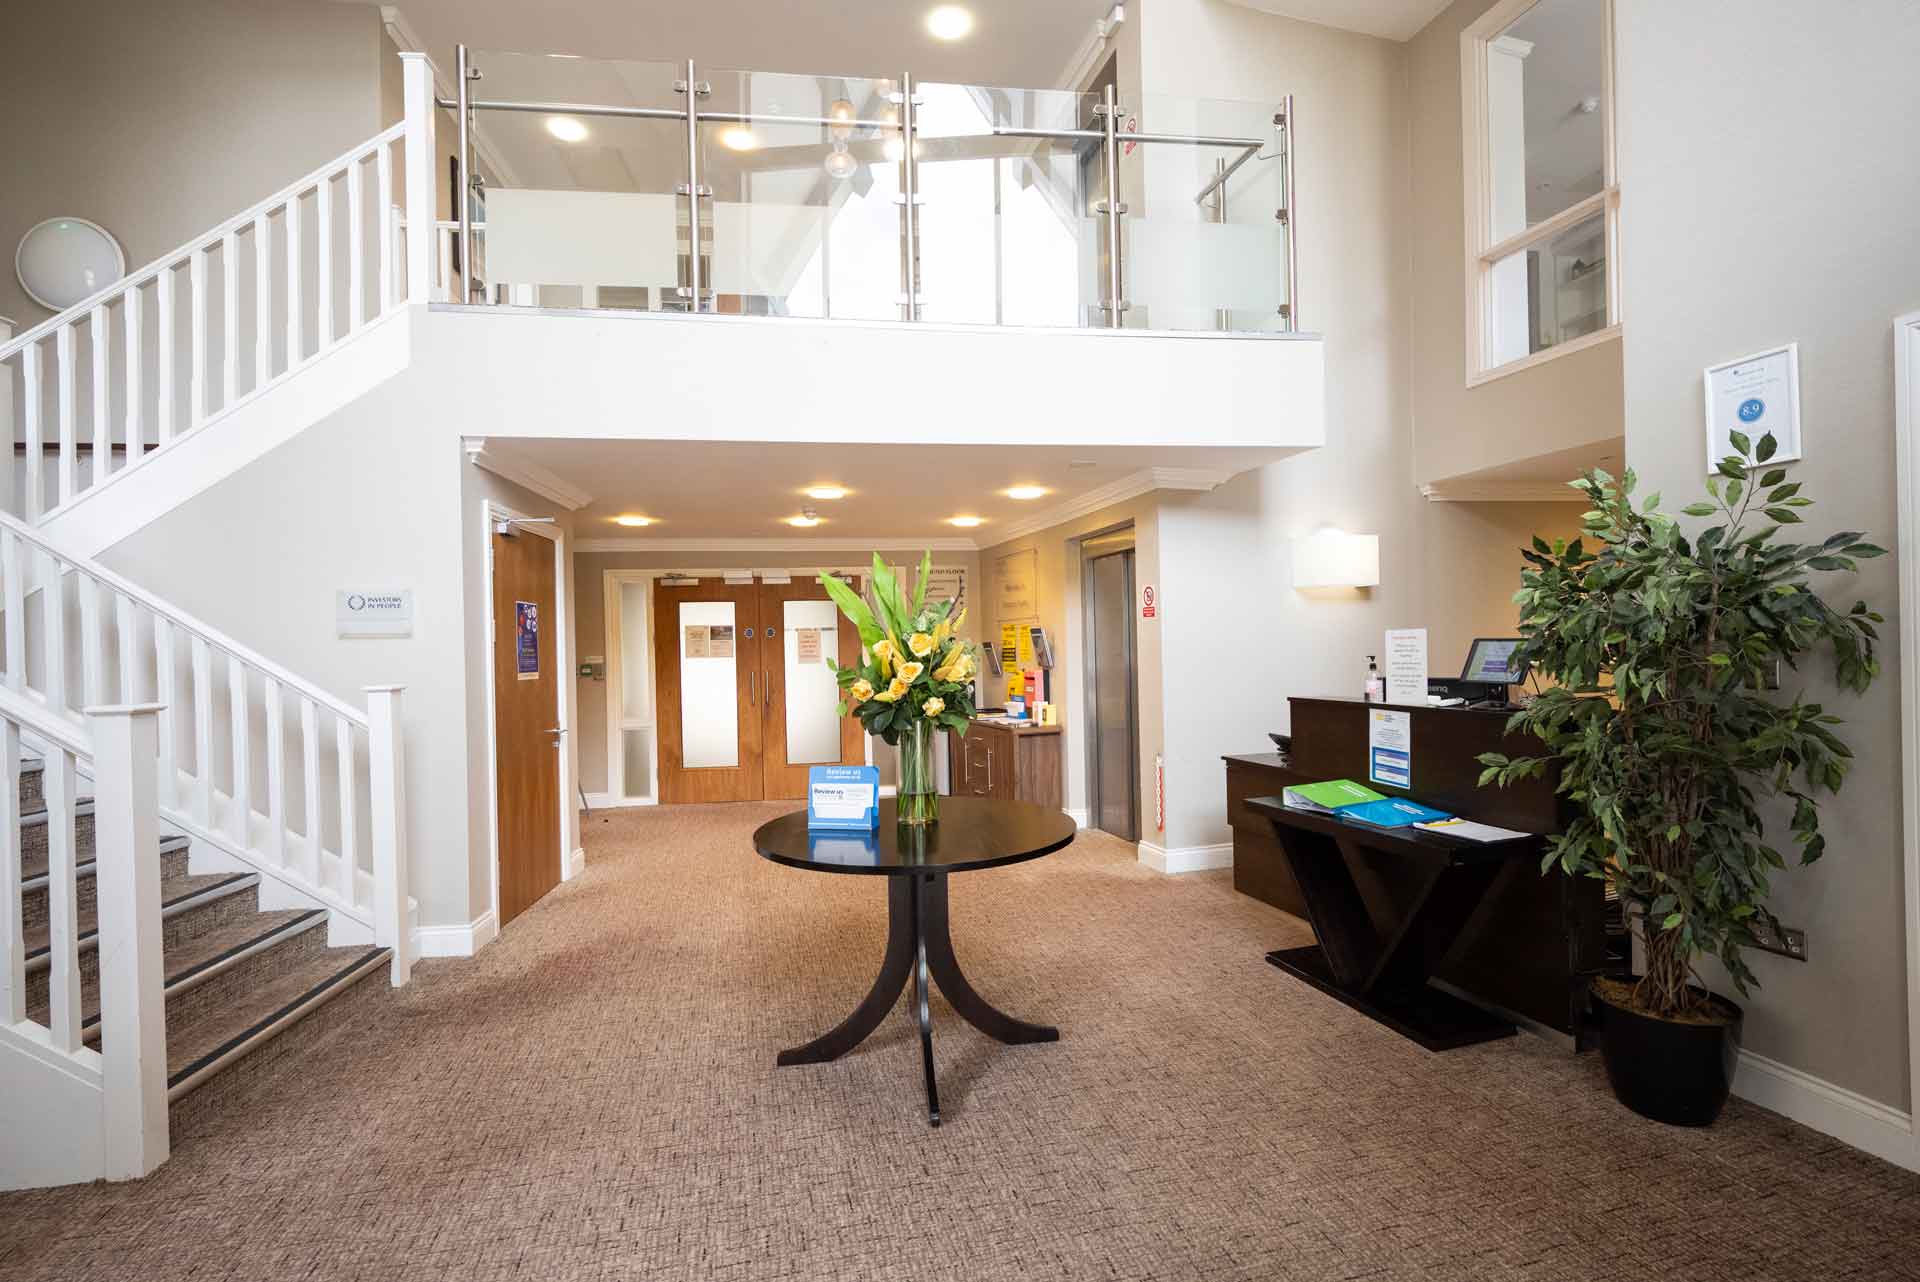 Chaucer House indoor reception and entrance area